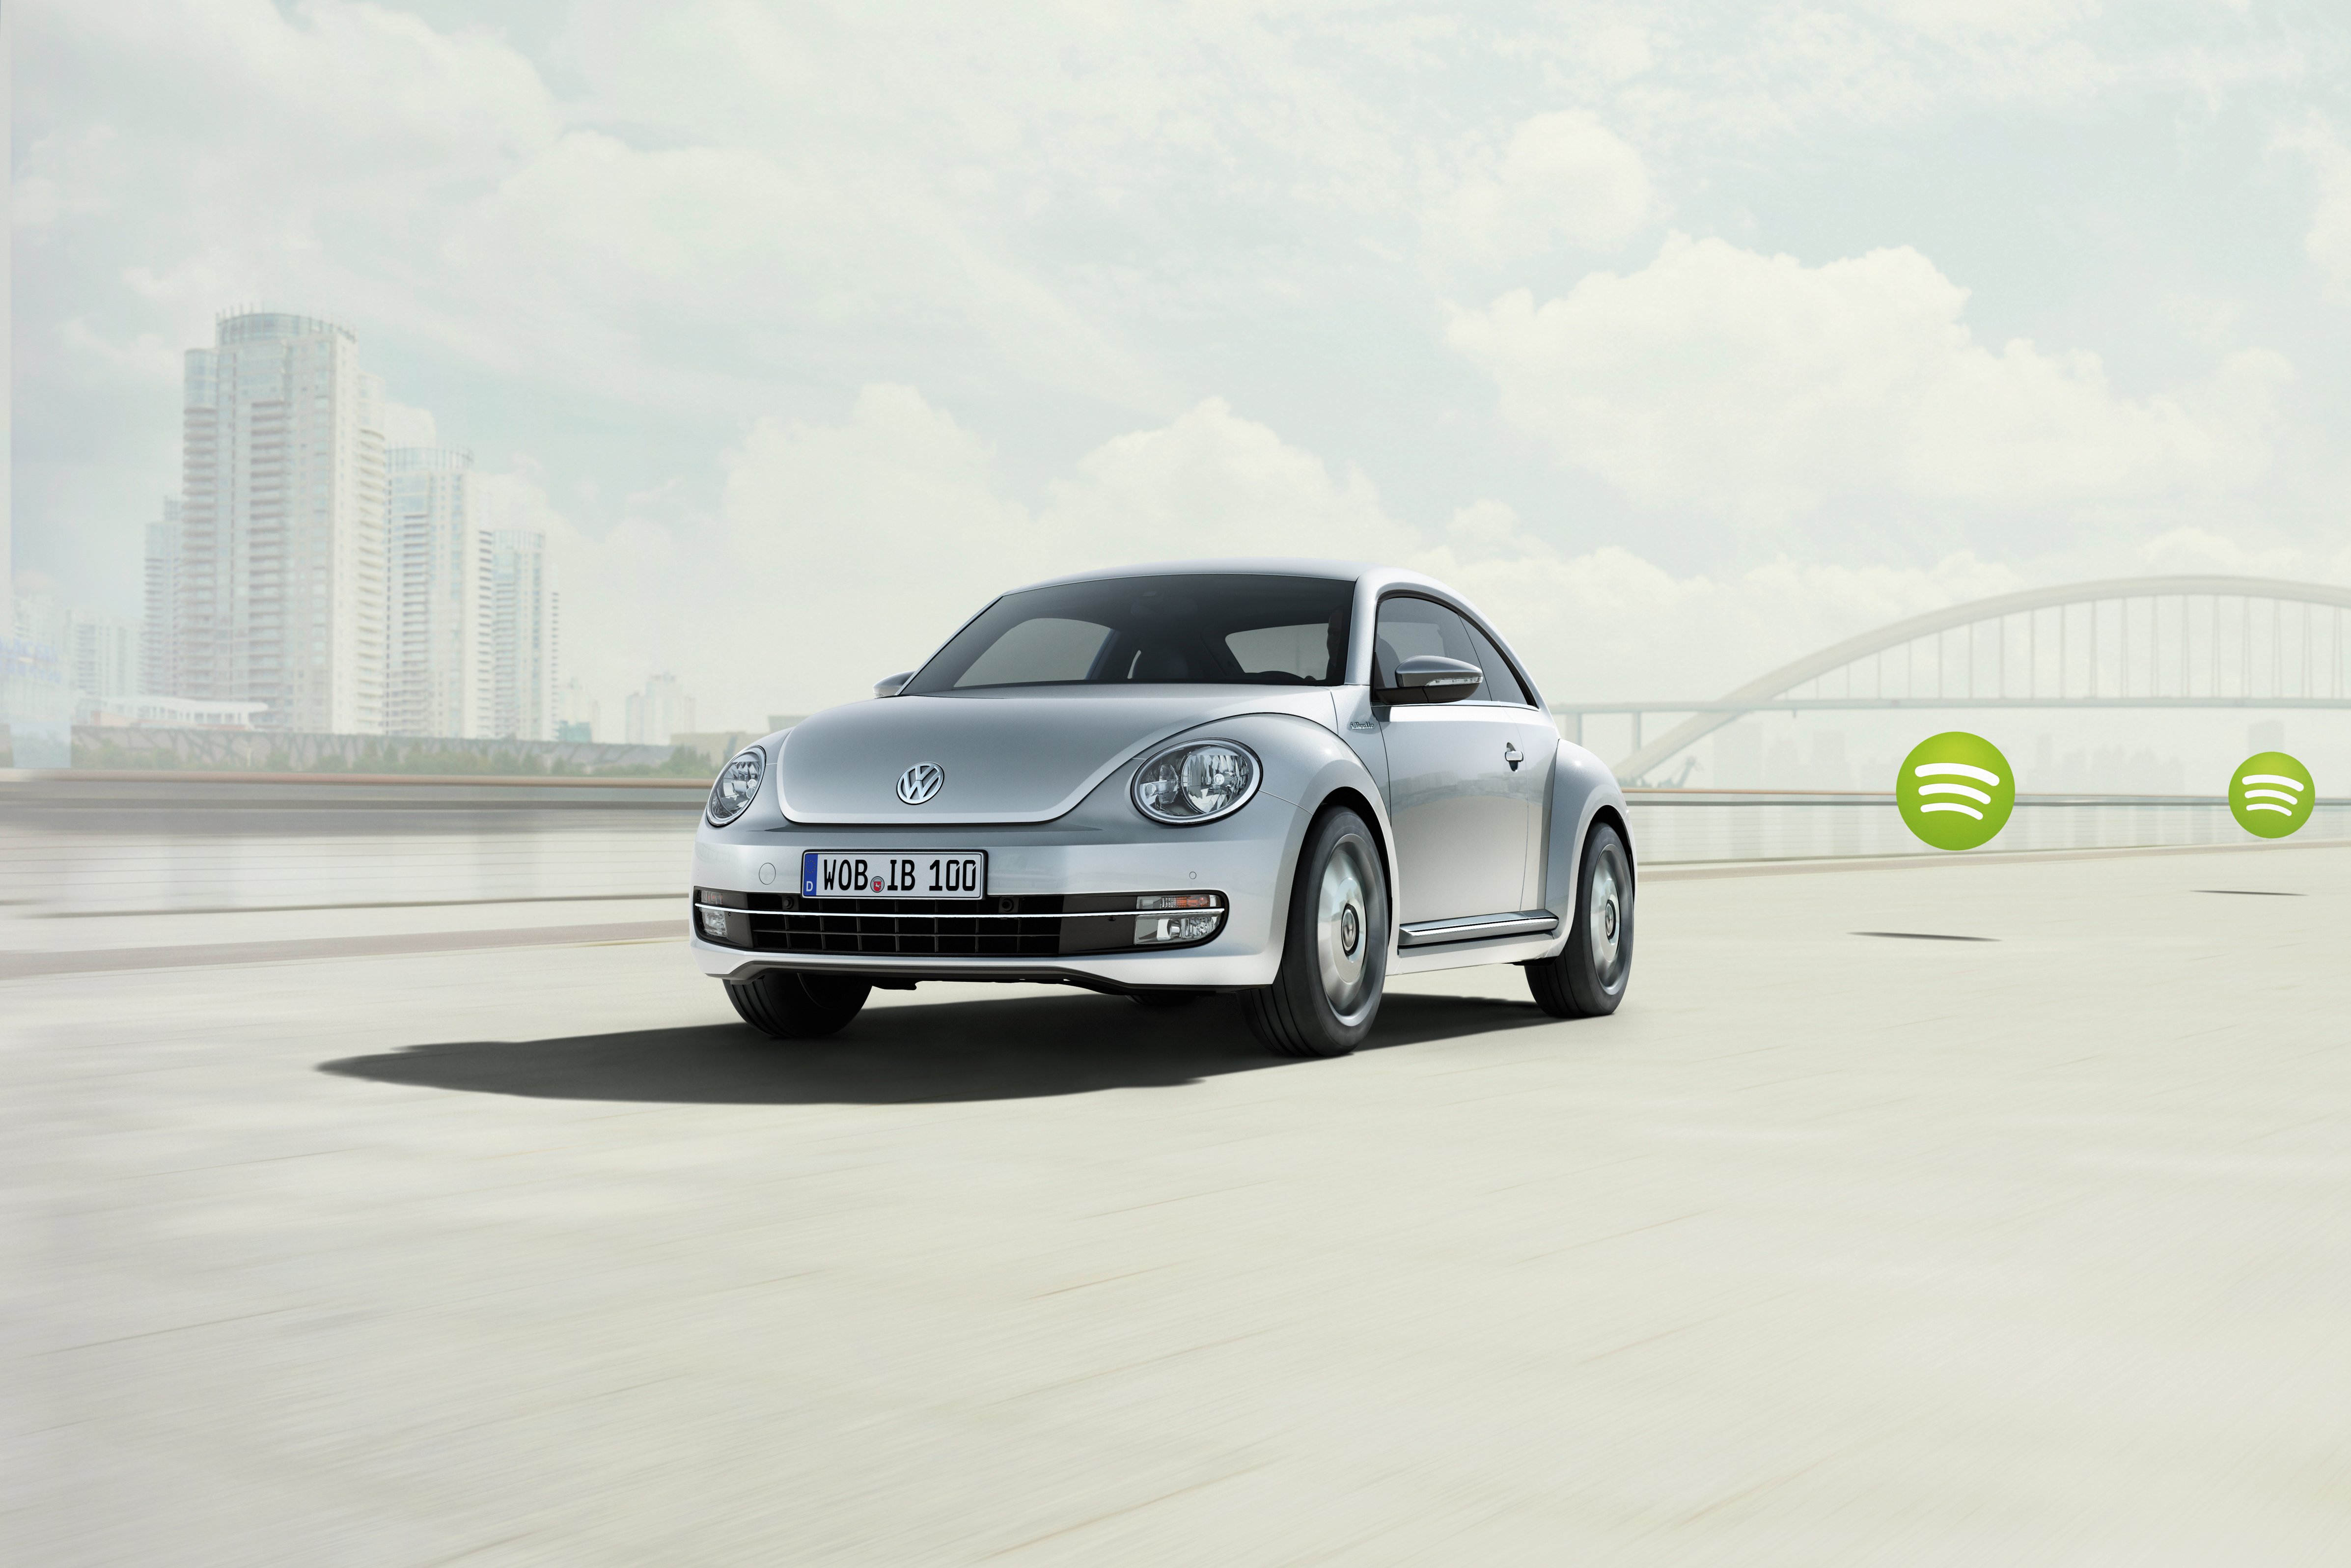 VW attempts to build iCar with iBeetle